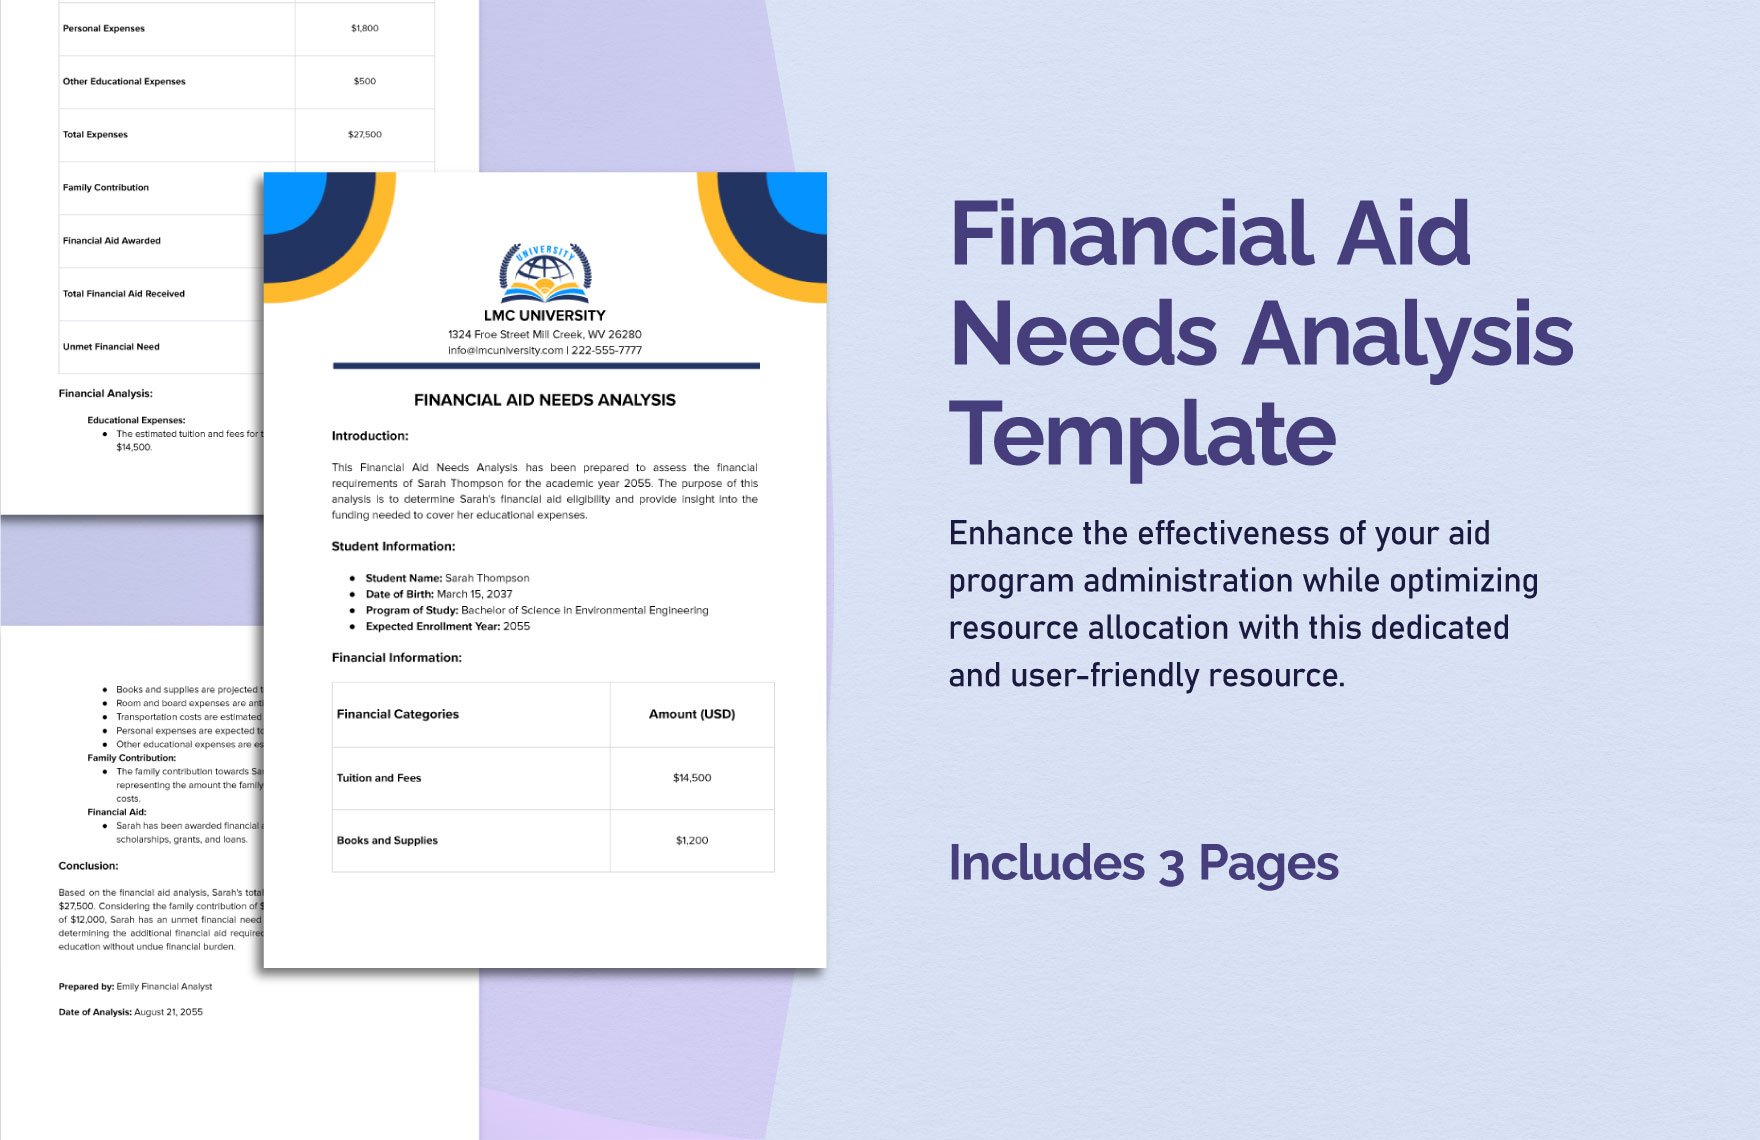 Financial Aid Needs Analysis Template